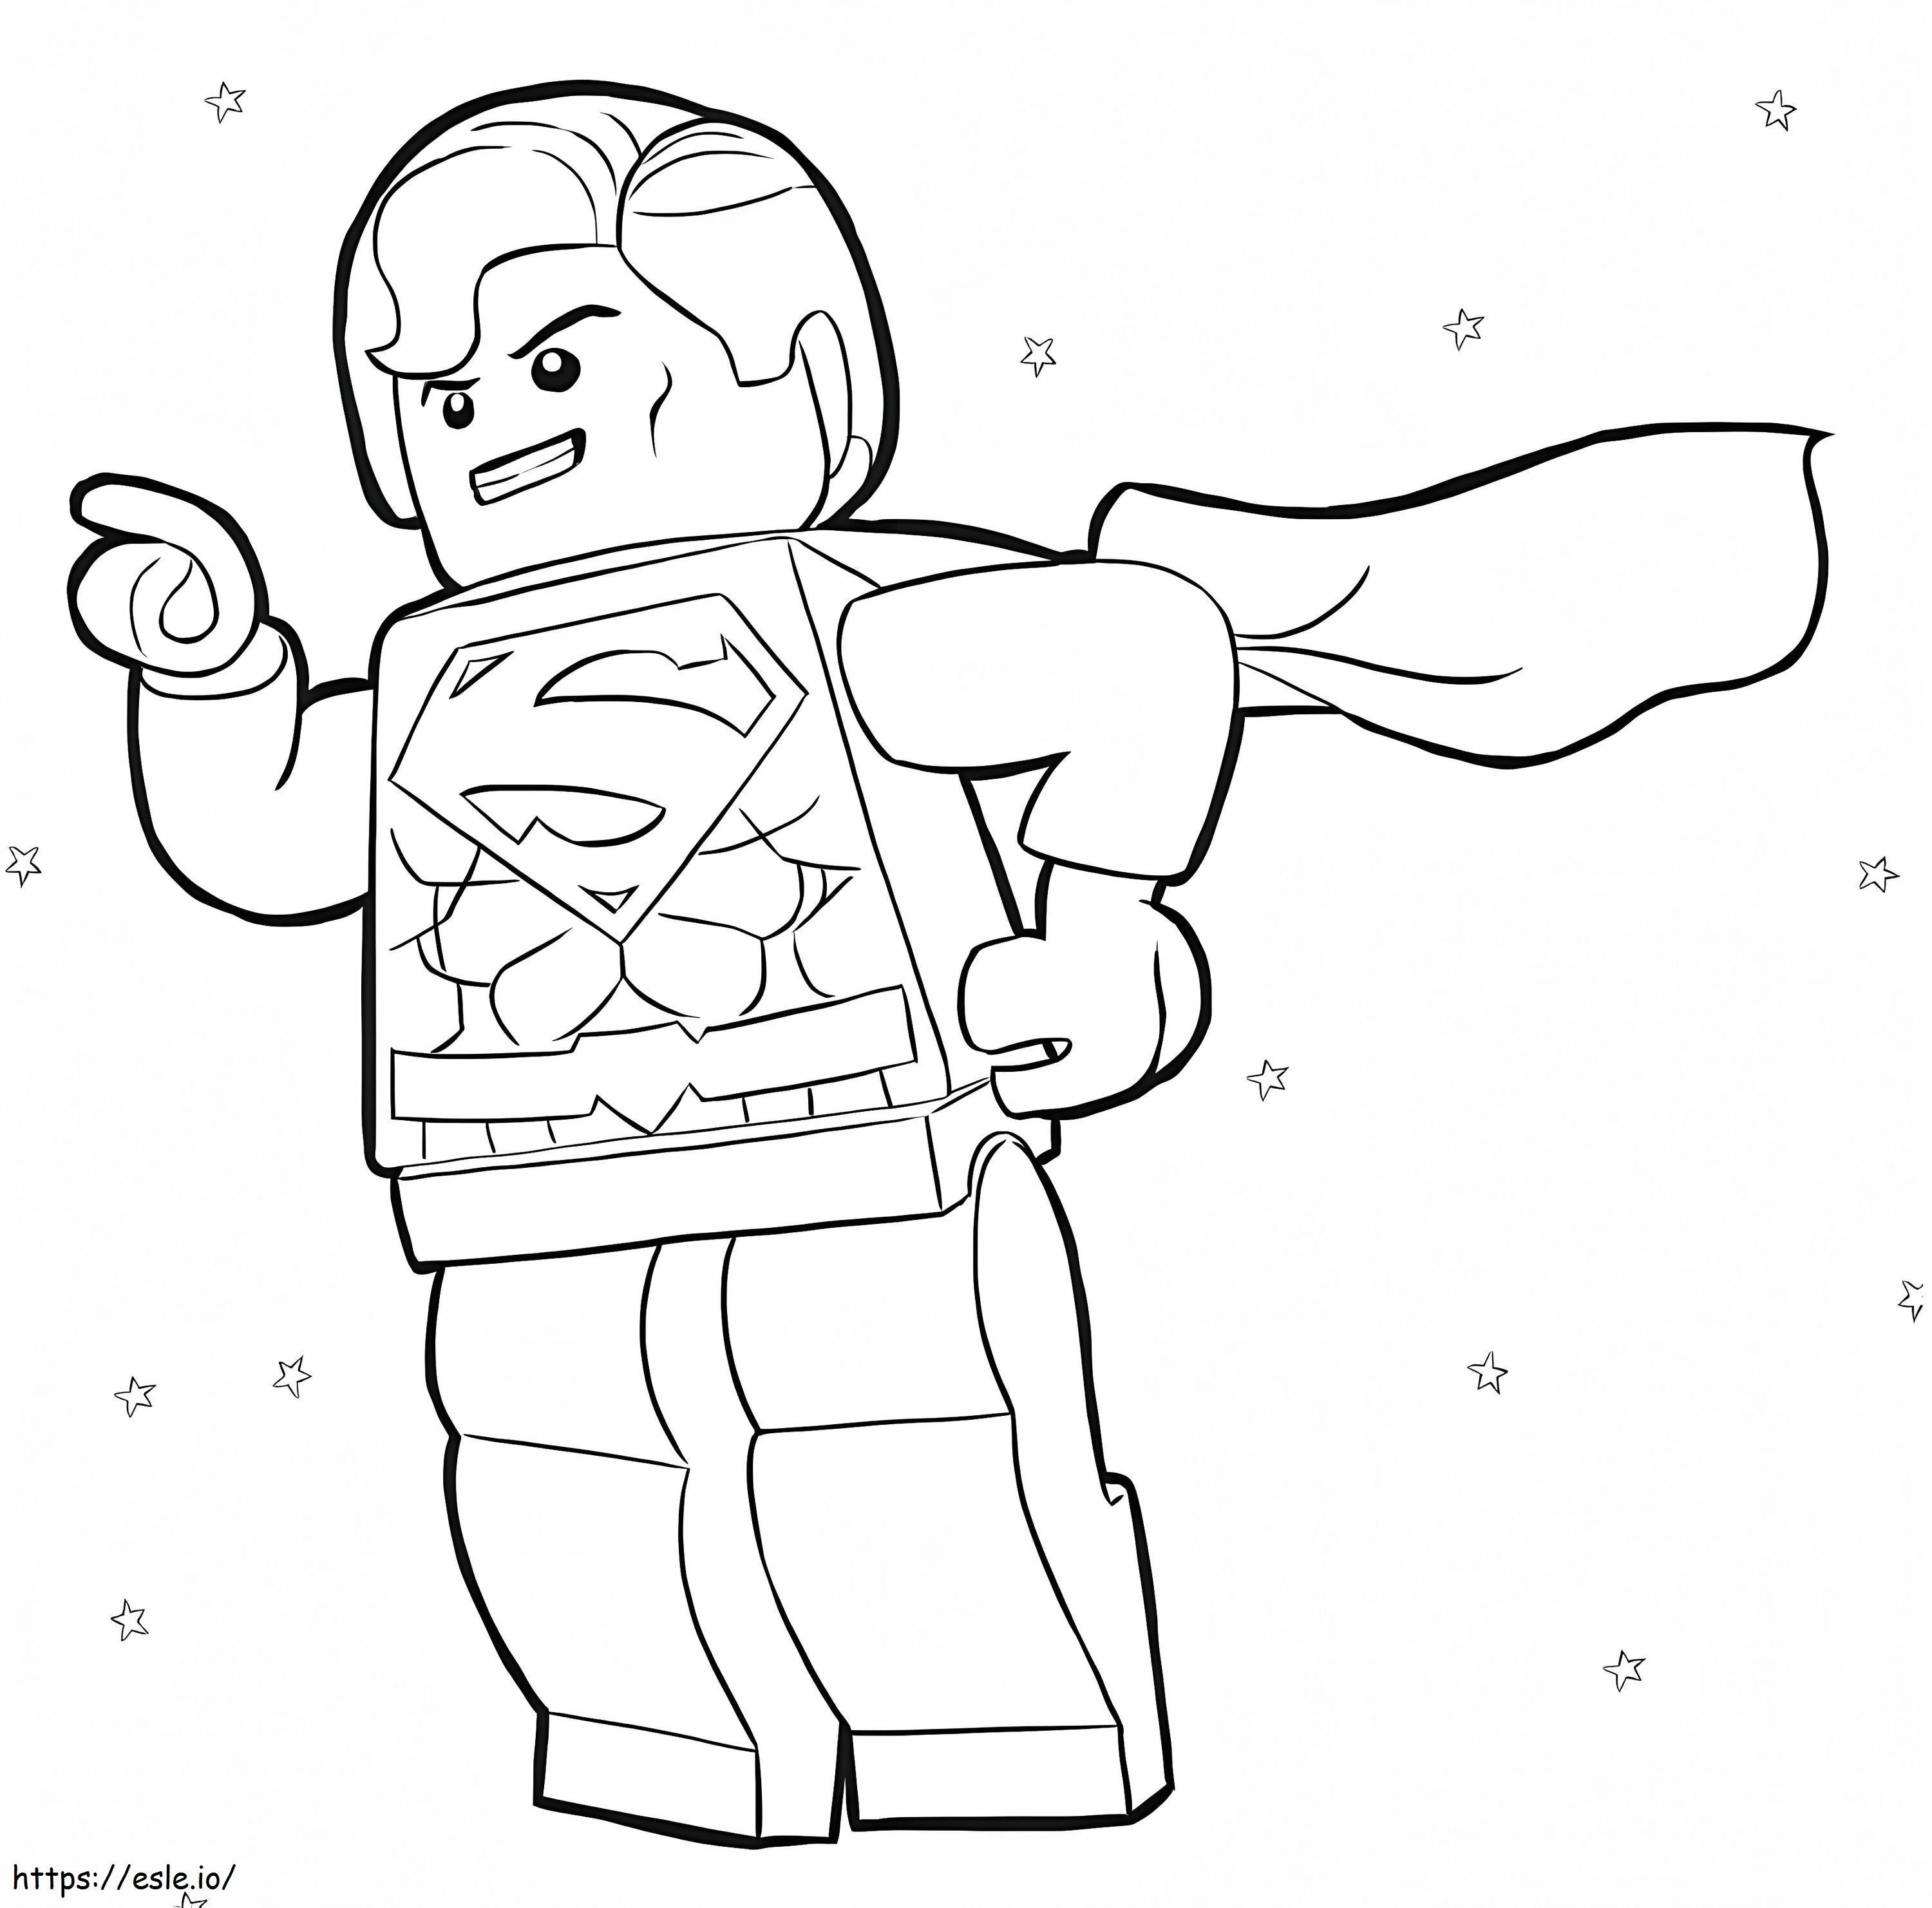 Lego Superman Flying 1 coloring page